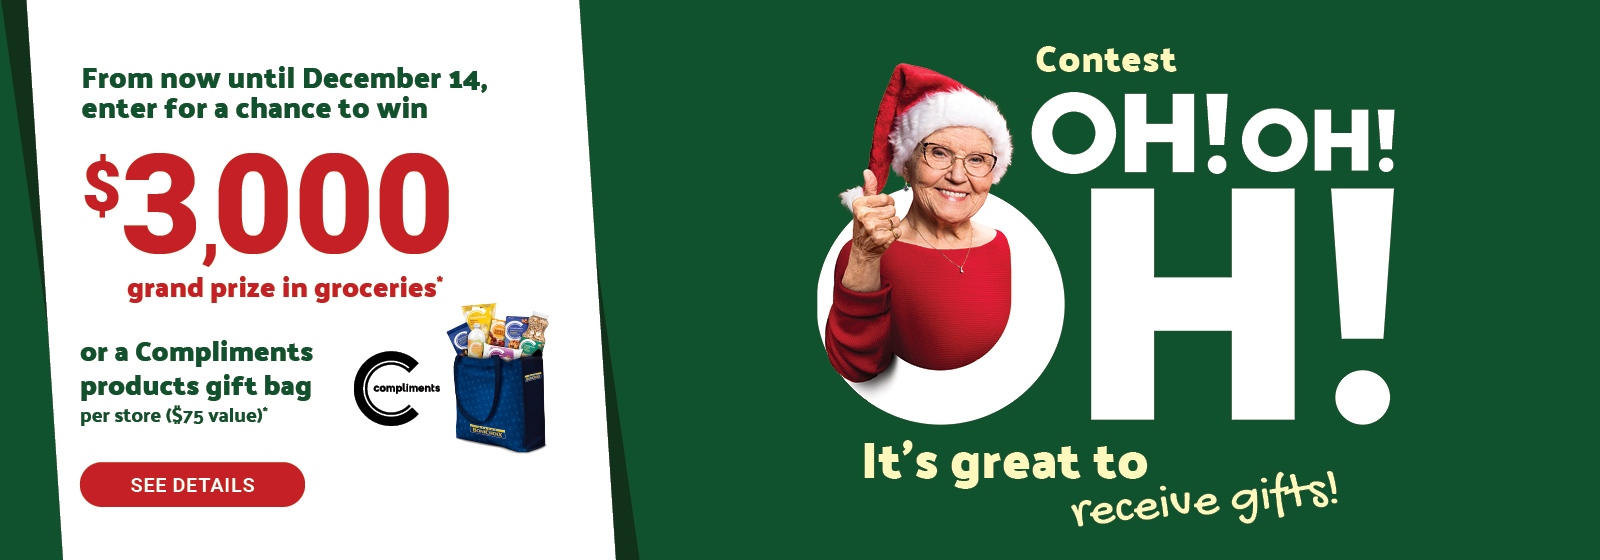 Text Reading 'Contest Oh!Oh! Oh! It's great to receive gifts! From now until December 14, enter for a chance to win $3,000 grand prize in groceries OR a Compliments products gift bag per store ($75 value). To 'See Details', click on the button on the left.'